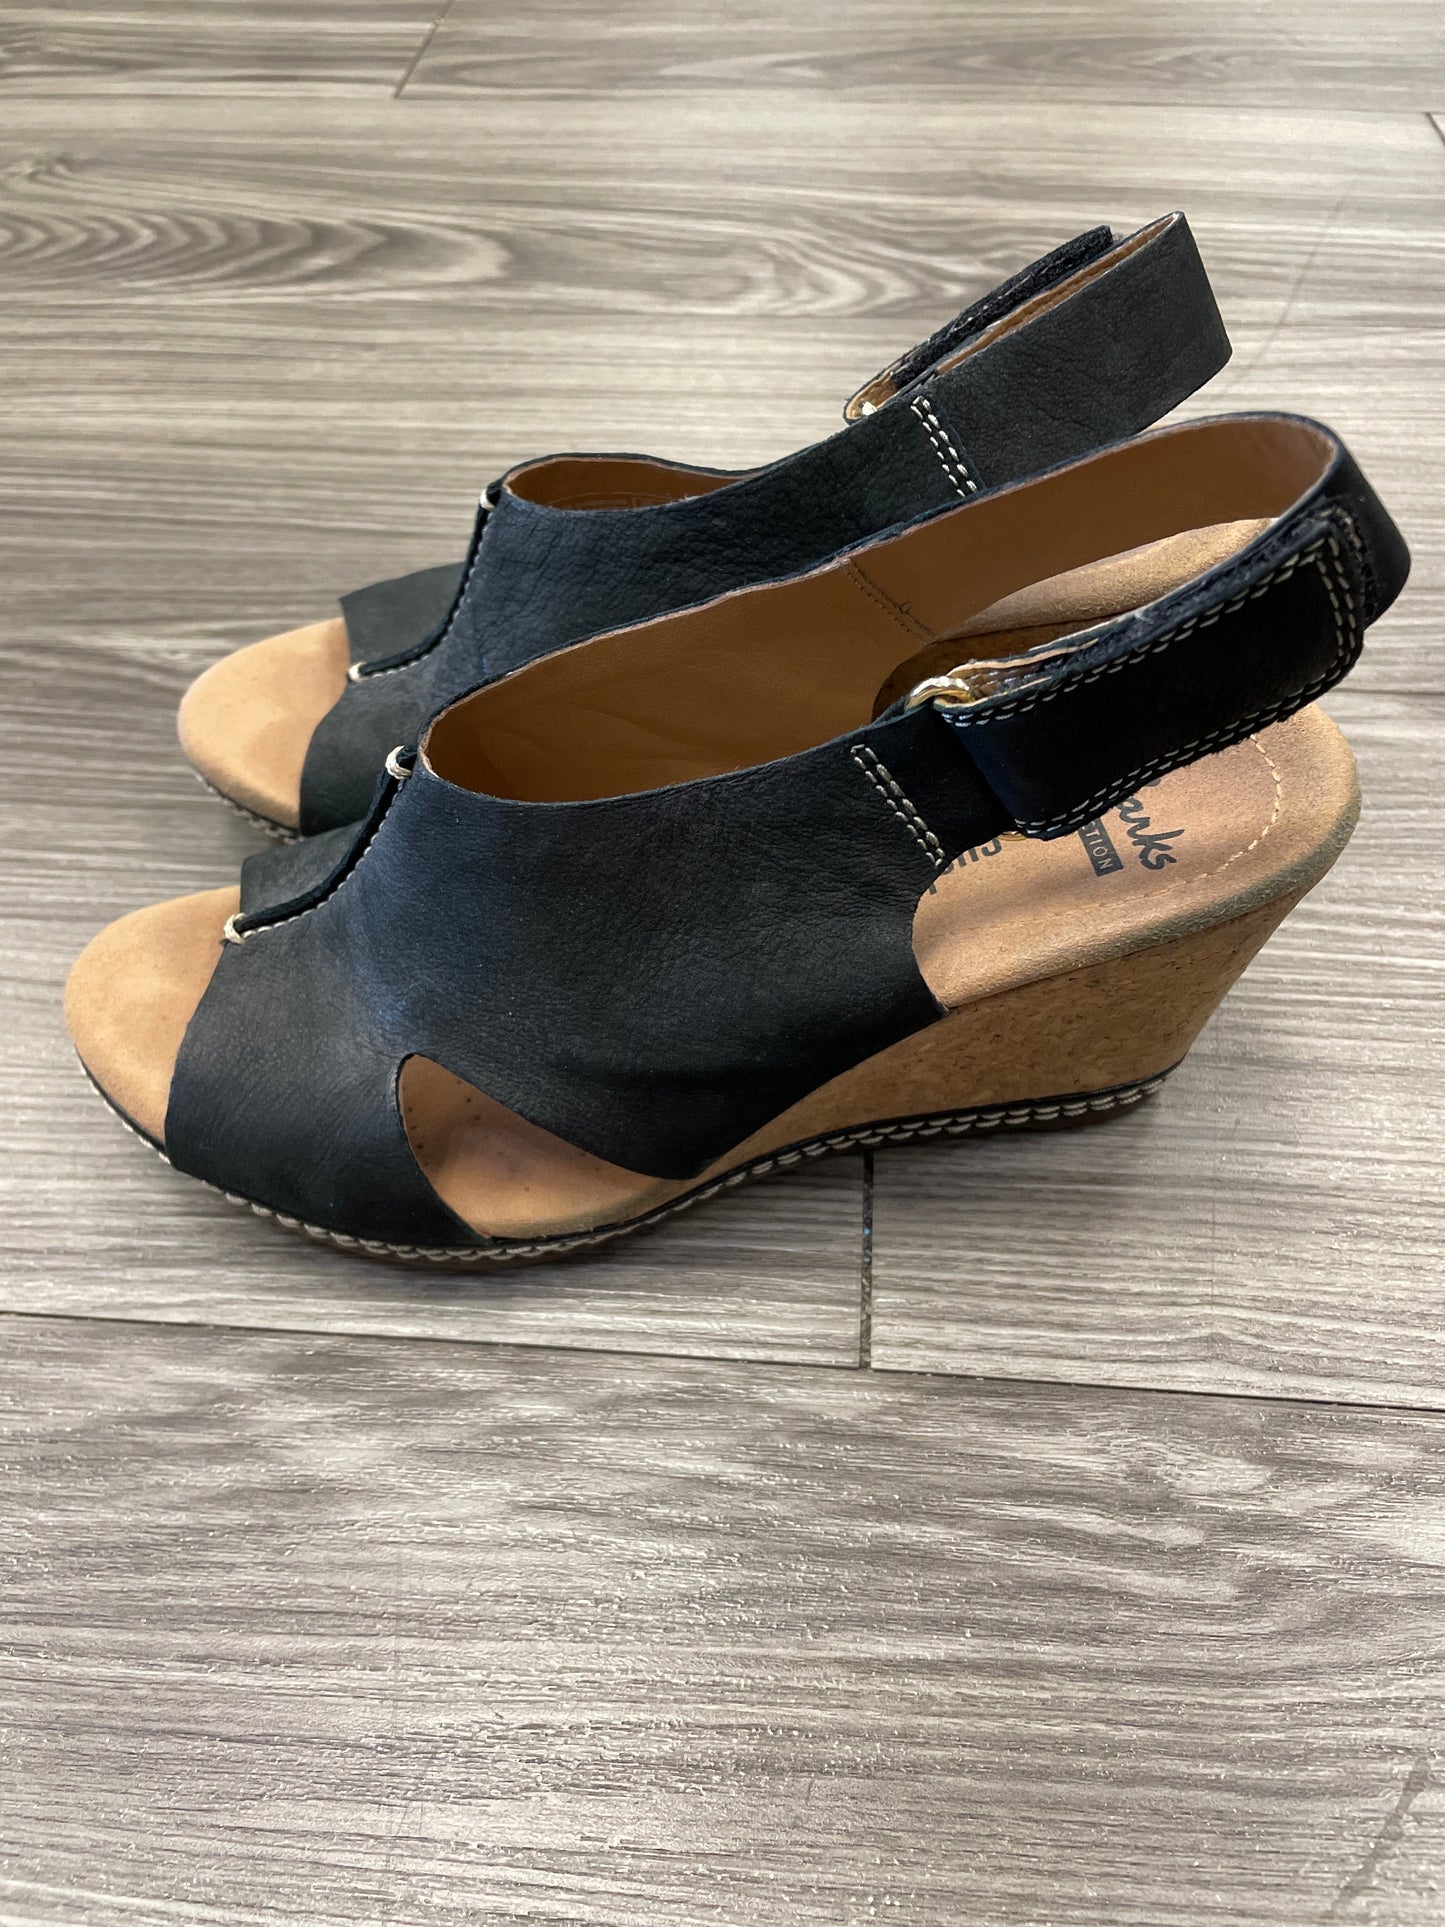 Shoes Heels Wedge By Clarks  Size: 5